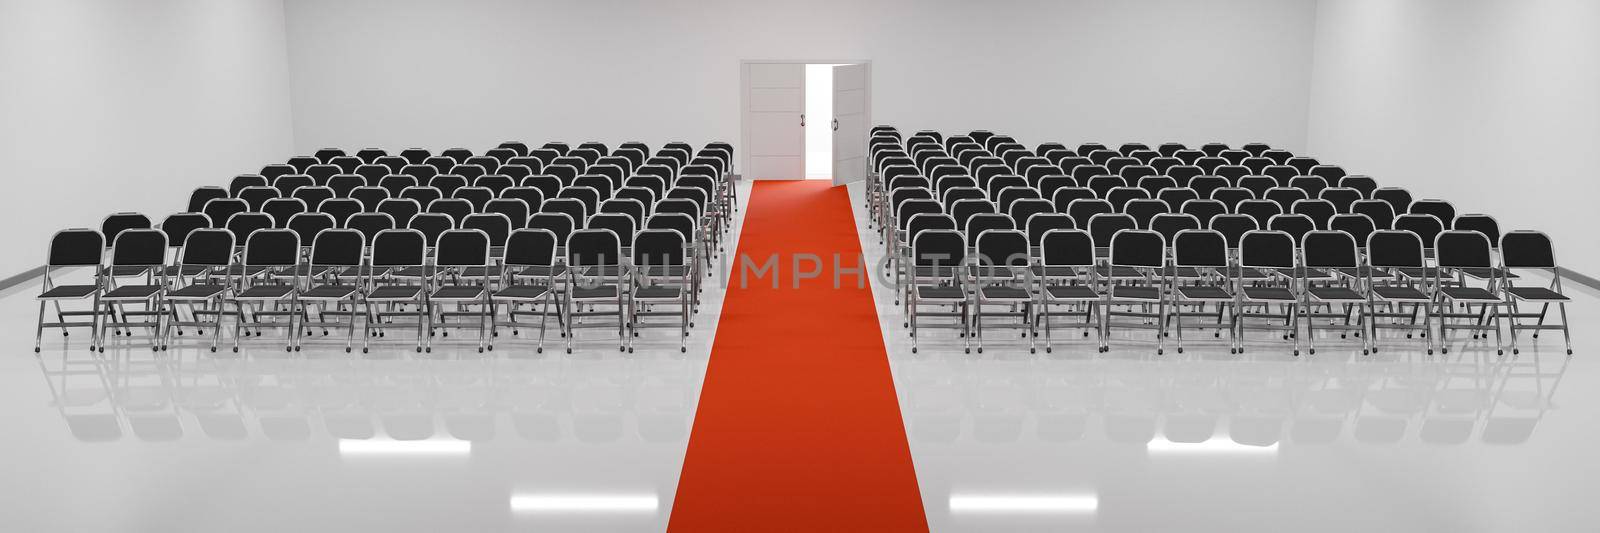 conference room full of chairs with a red carpet in the middle and a door at the back. 3d illustration